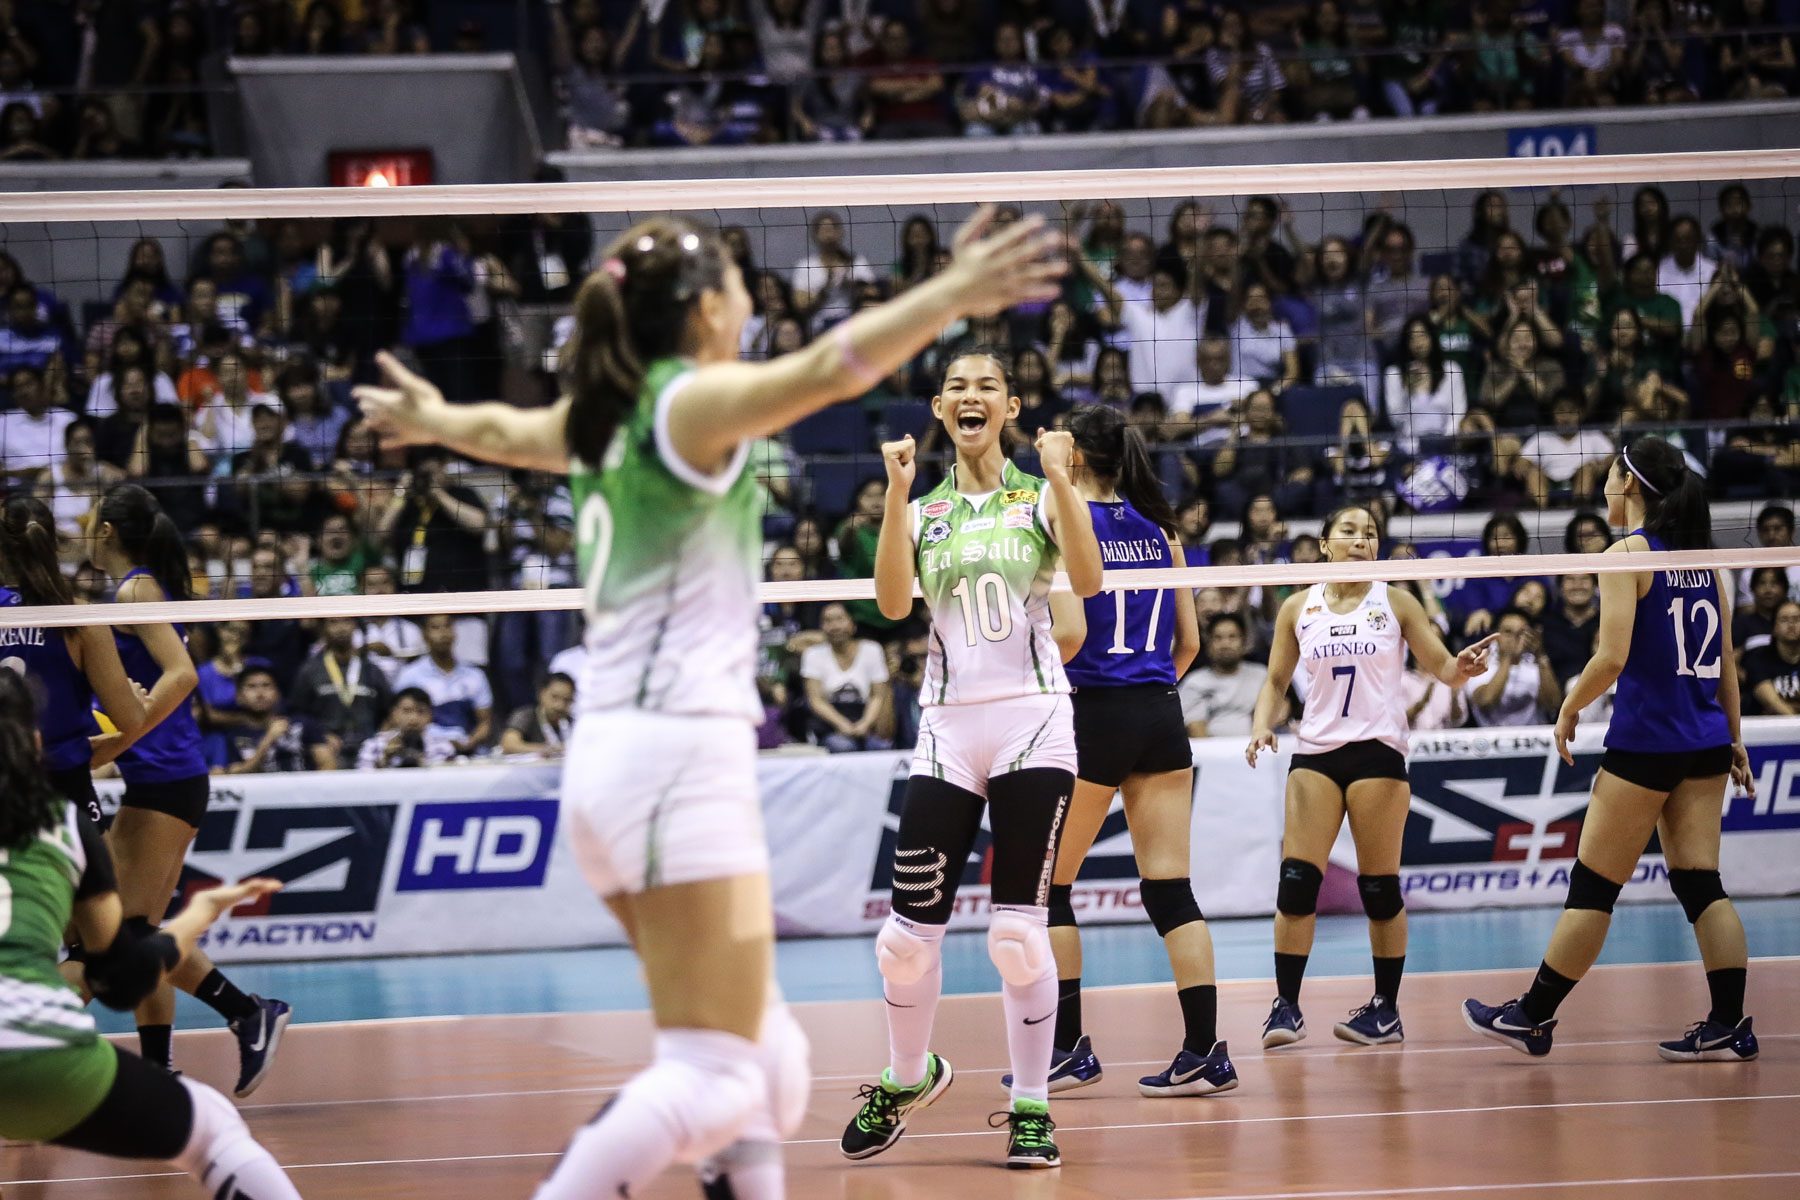 La Salle secures back-to-back titles after sweeping Ateneo